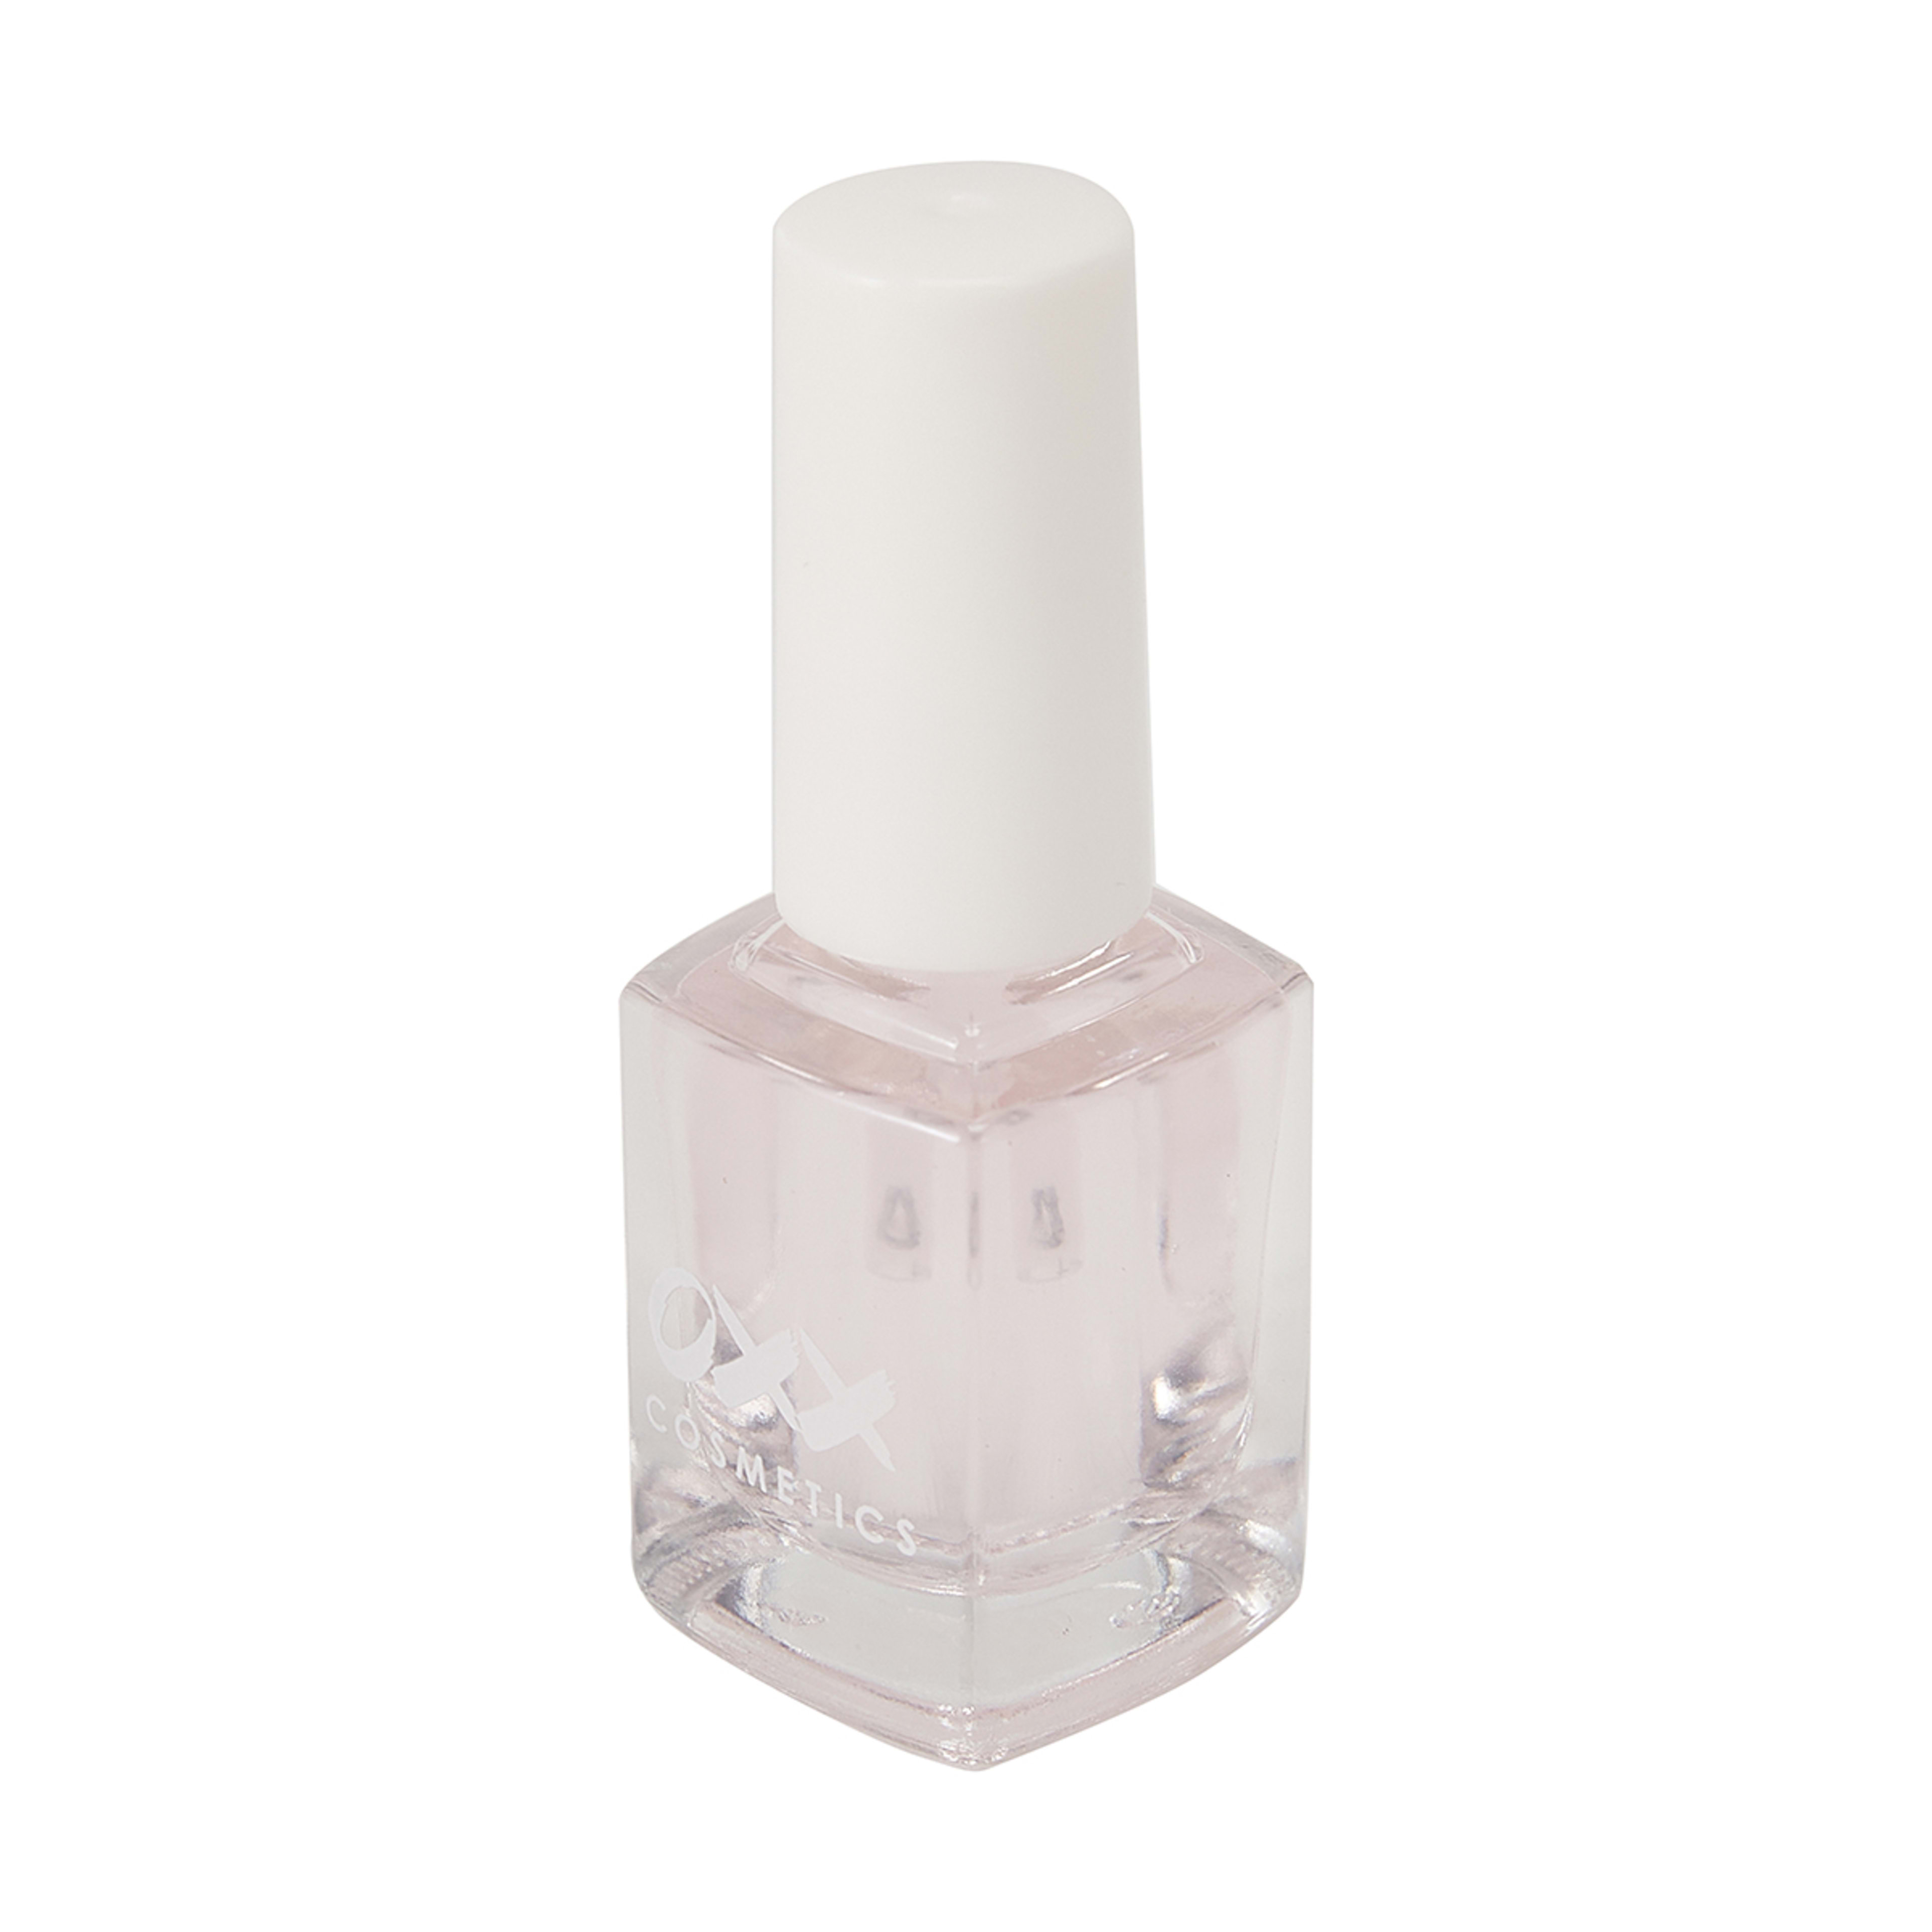 OXX Cosmetics Nail Care Strengthener - Kmart